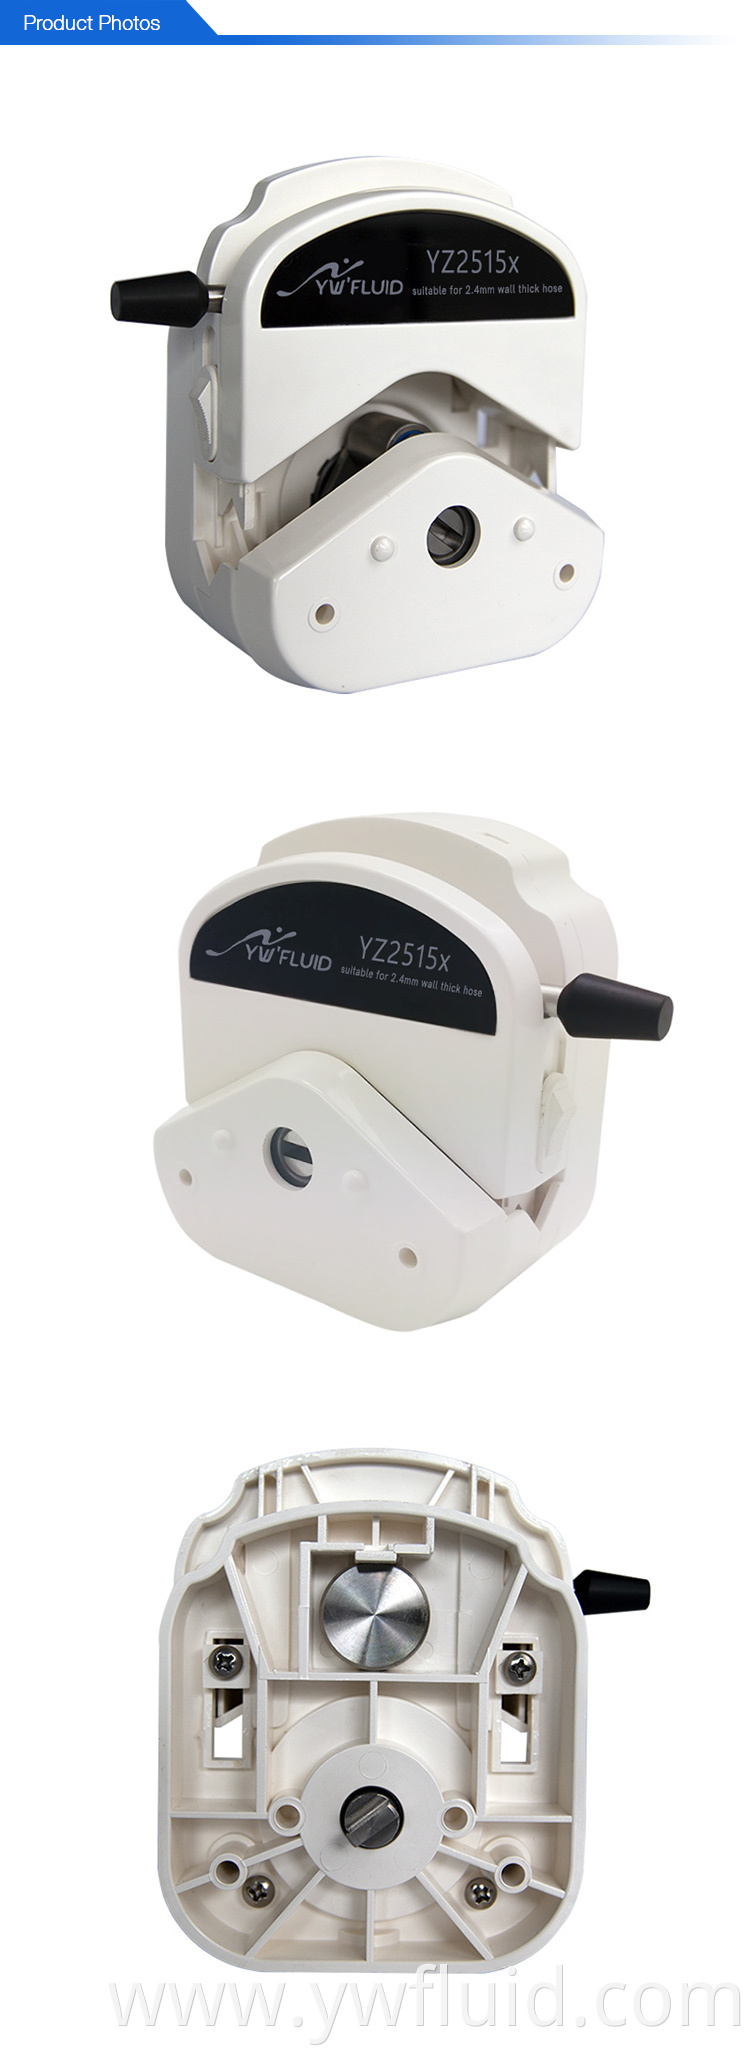 YWfluid Strong Chemical resistance Easy load peristaltic pump head Widely used in industry ,food,medical care etc